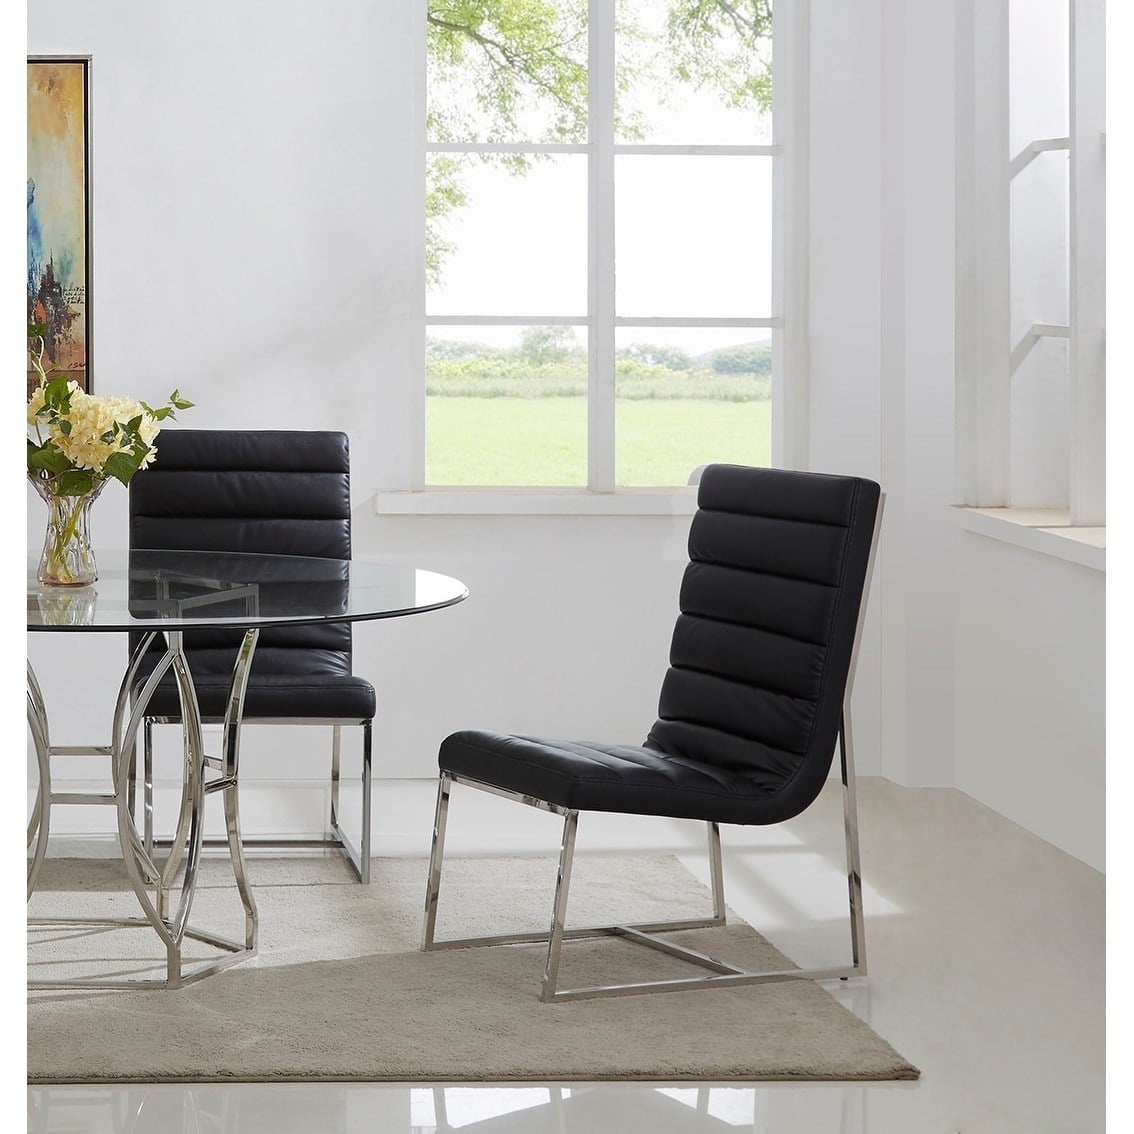 Best Master Modern Faux Leather Dining, Best Master Furniture Faux Leather Dining Chairs